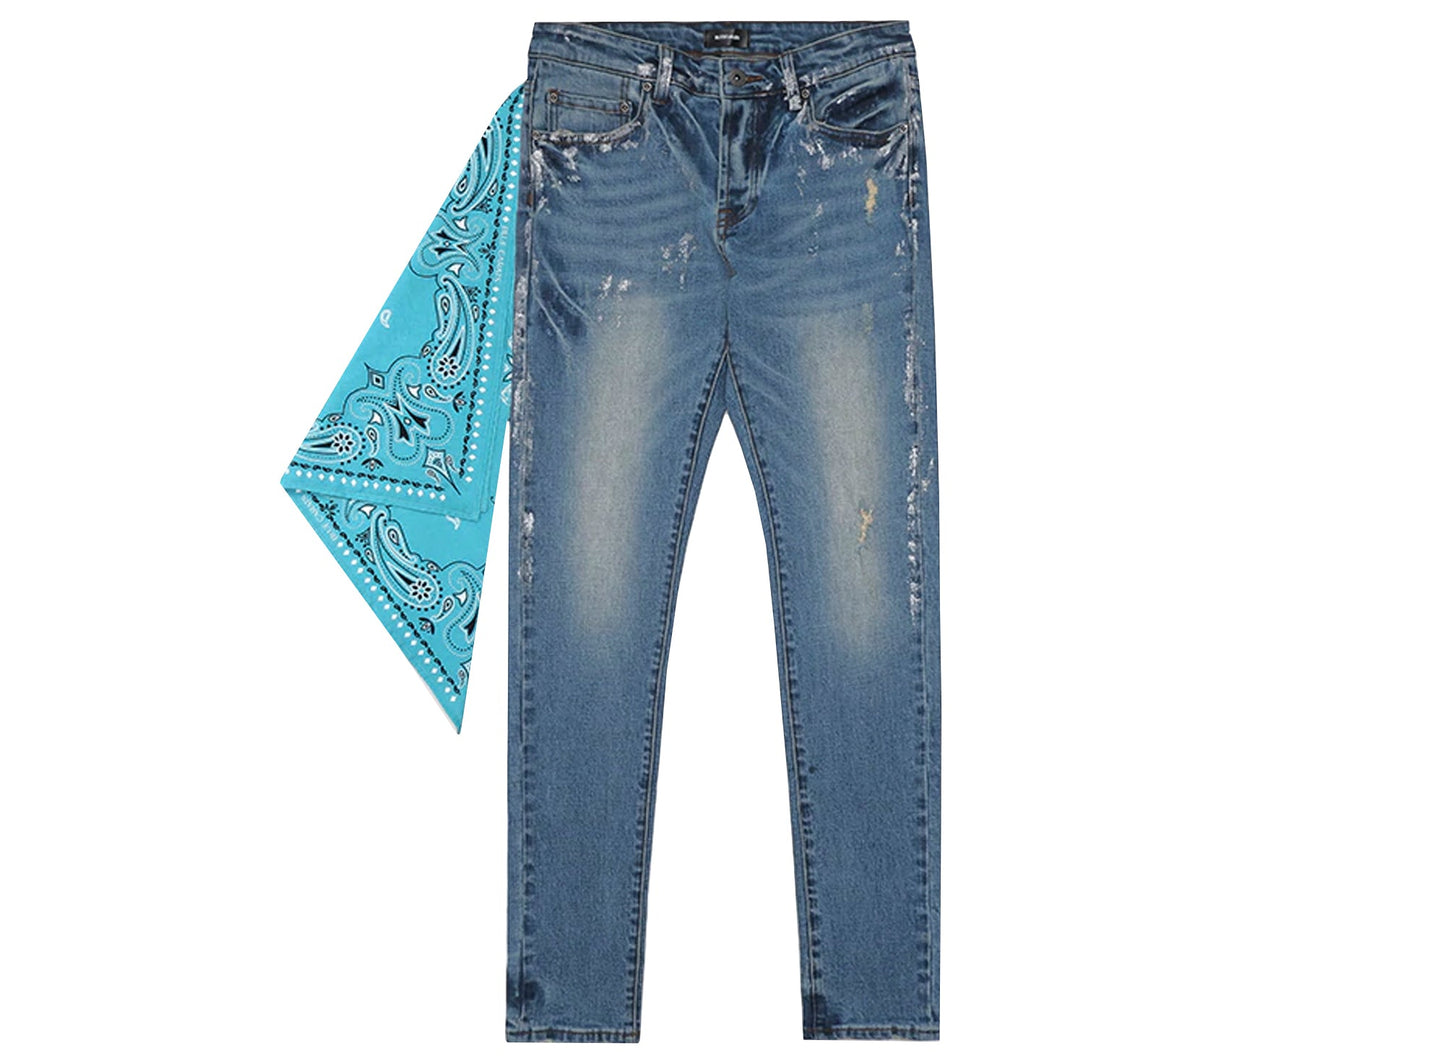 BLUECARATS The McQueen 5 Pocket Slim Fit Jeans